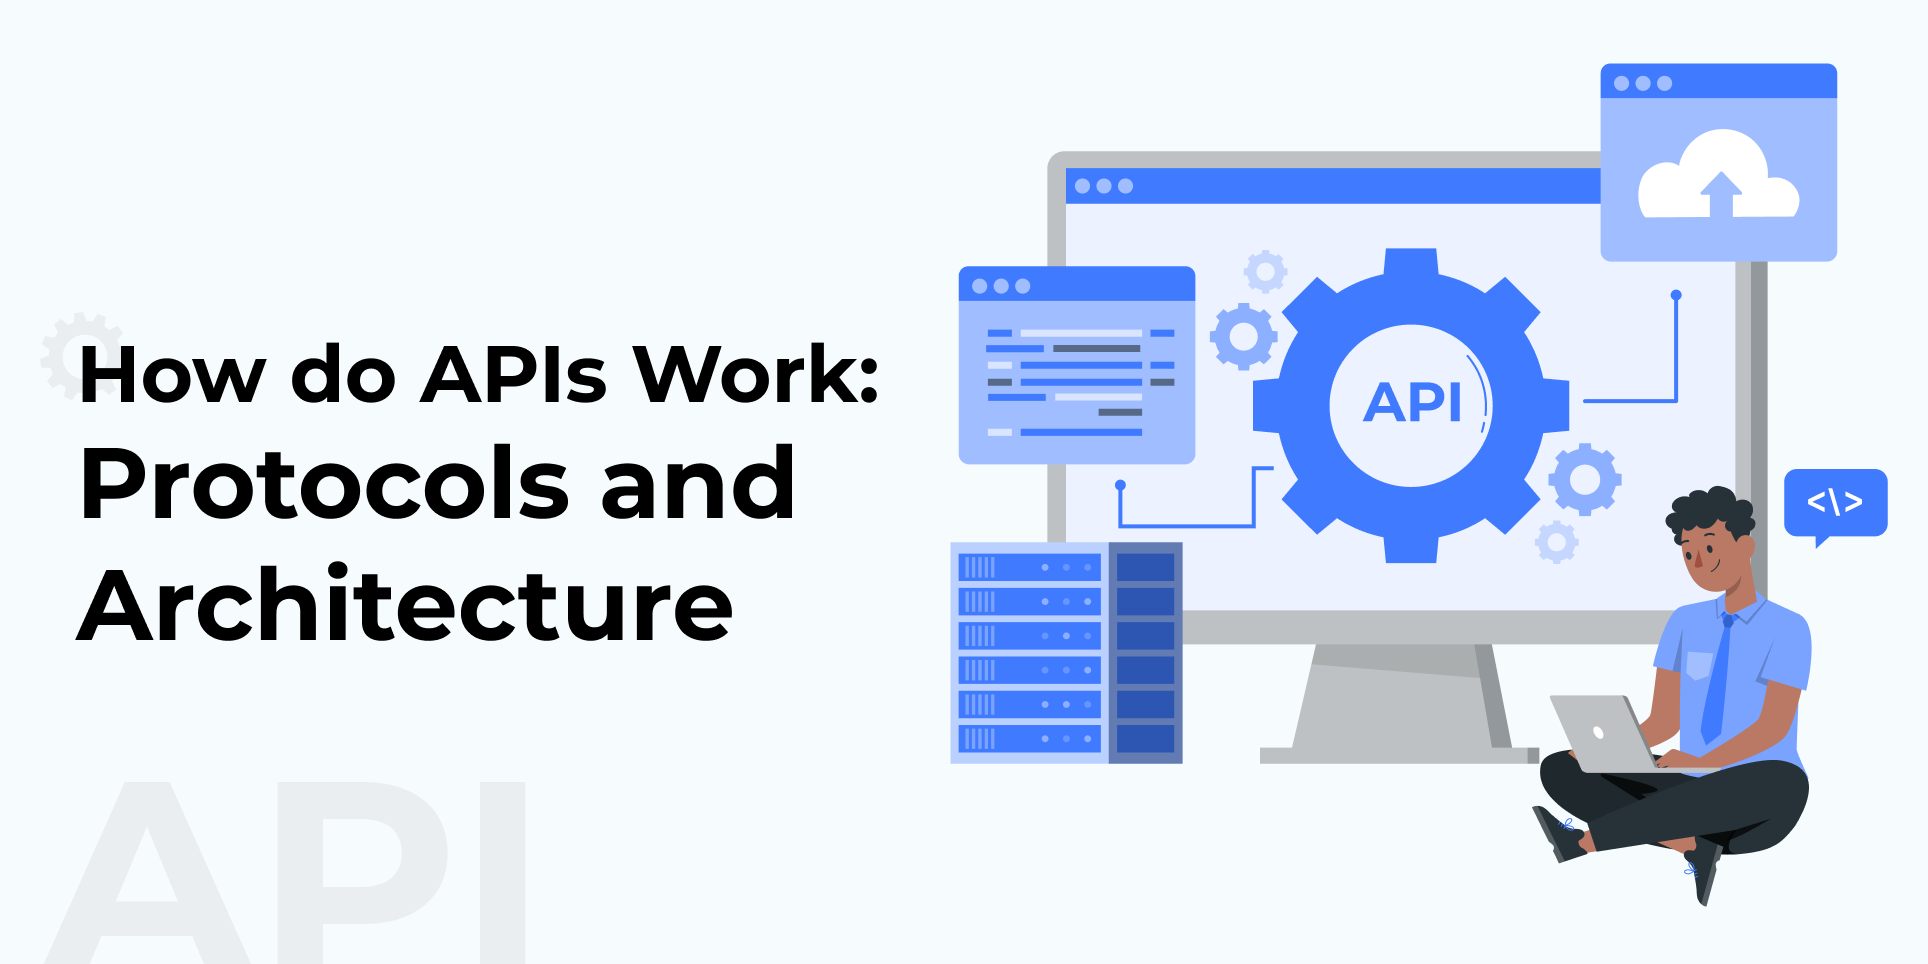 How do APIs Work: Protocols and Architecture